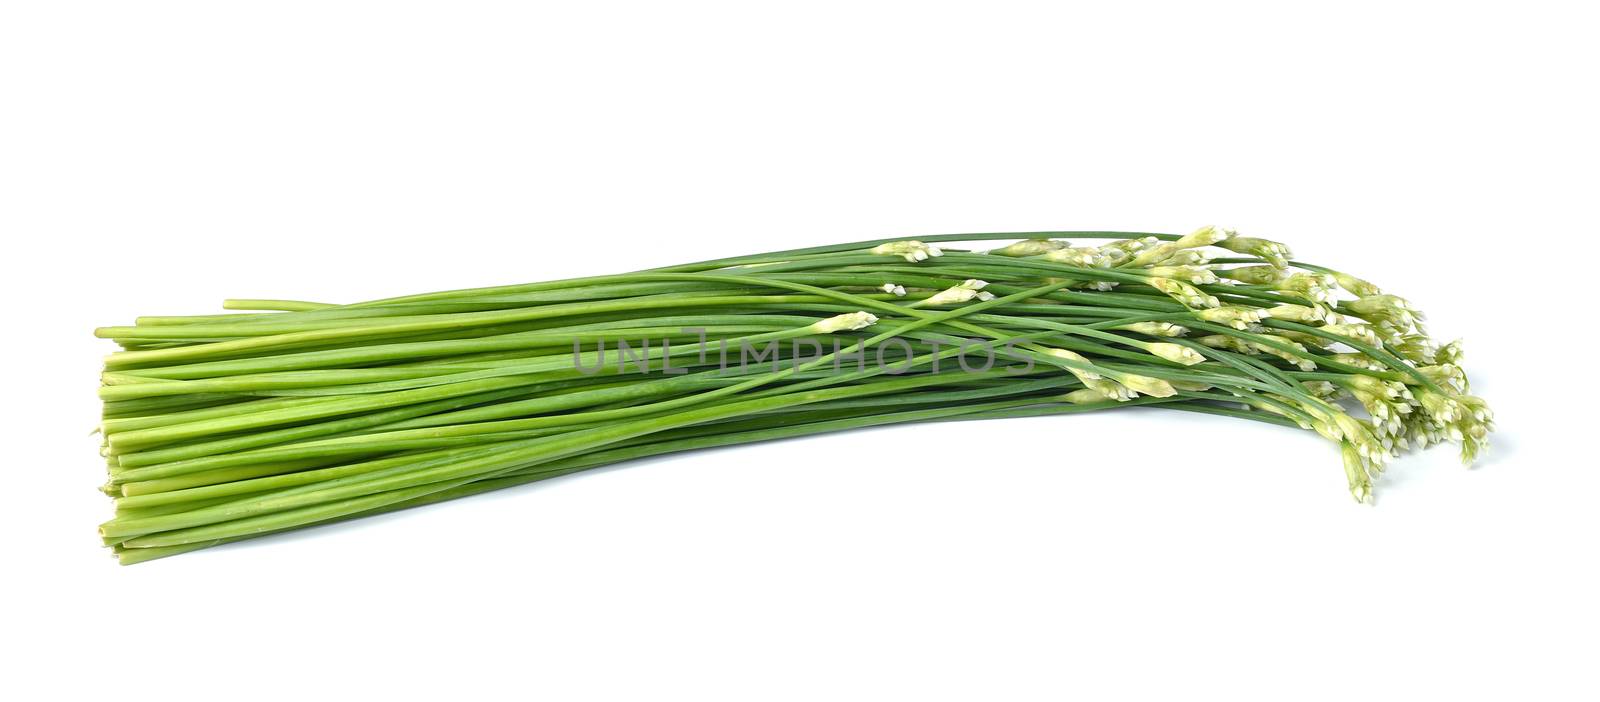 onion flower isolated on white background